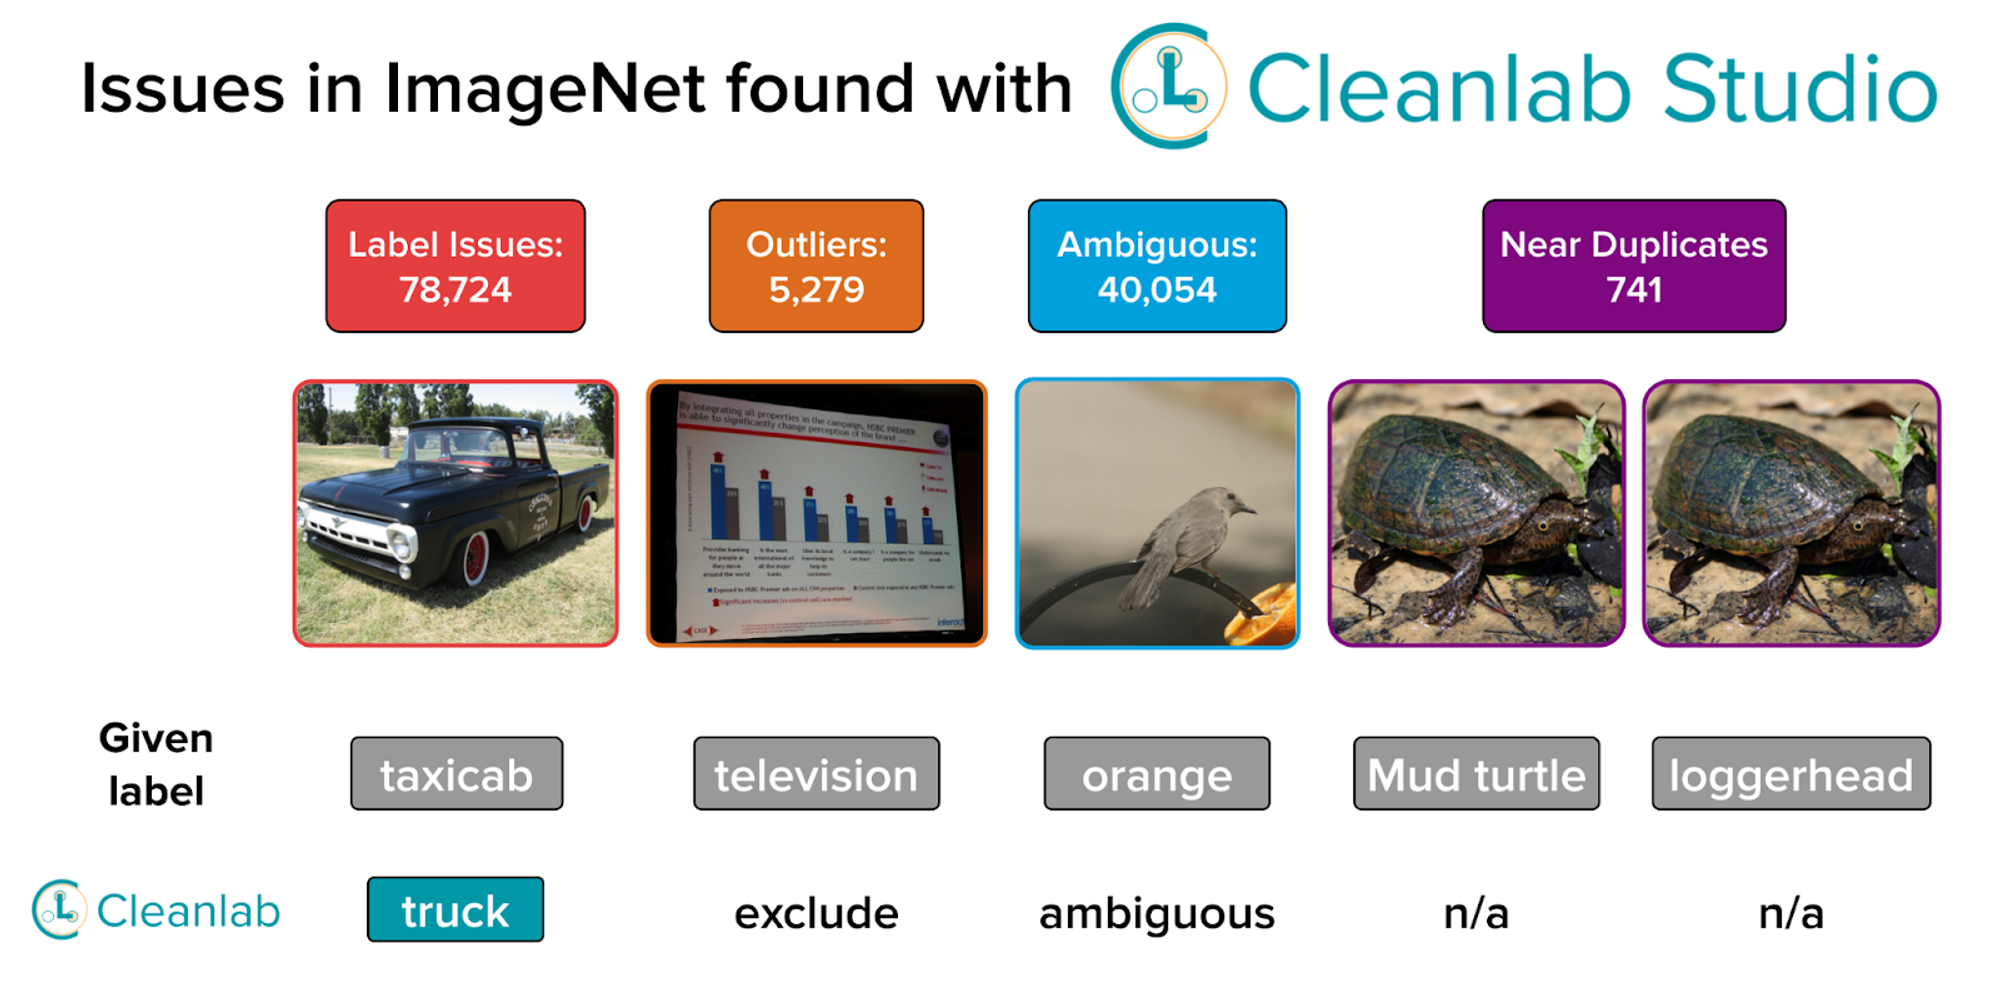 Issues found with Cleanlab software in IMAGENET.